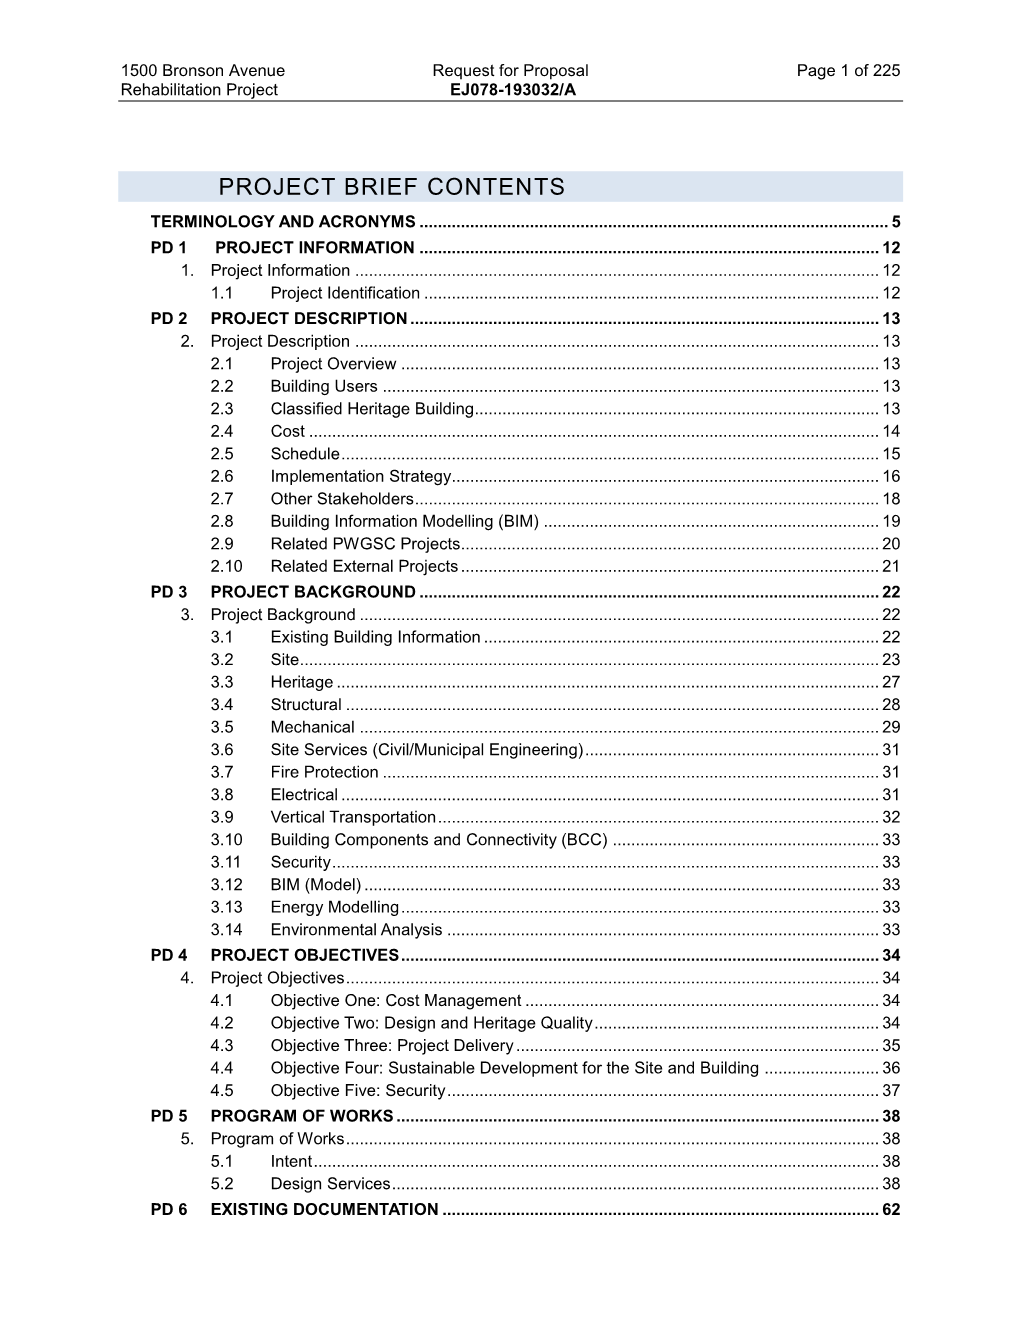 Project Brief Contents Terminology and Acronyms